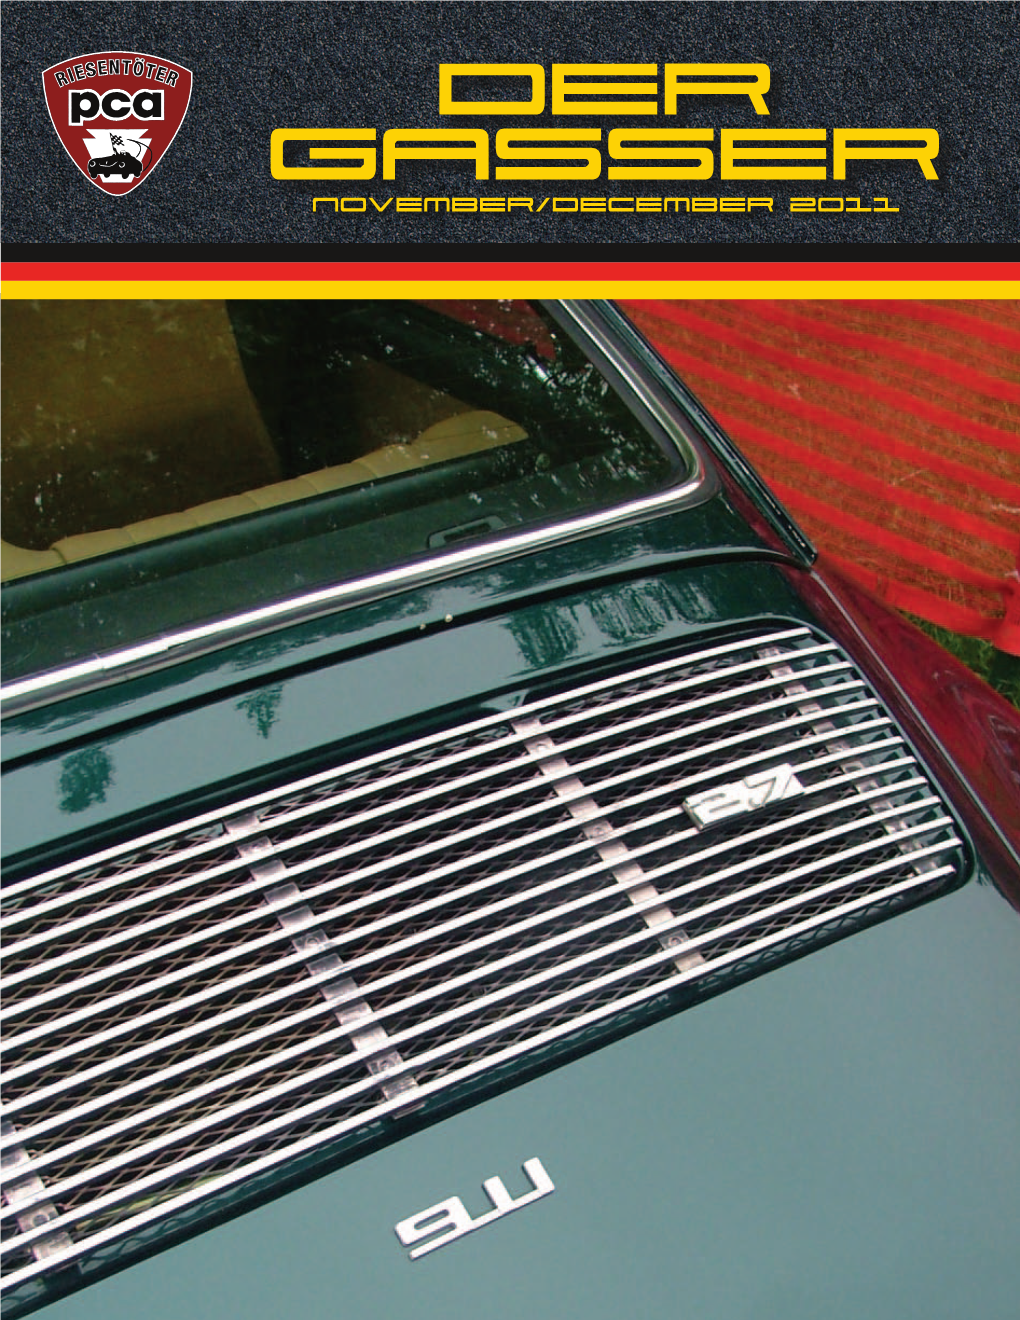 November/December 2011 DER GASSER Letter from the Editor — Table of Contents — So Long